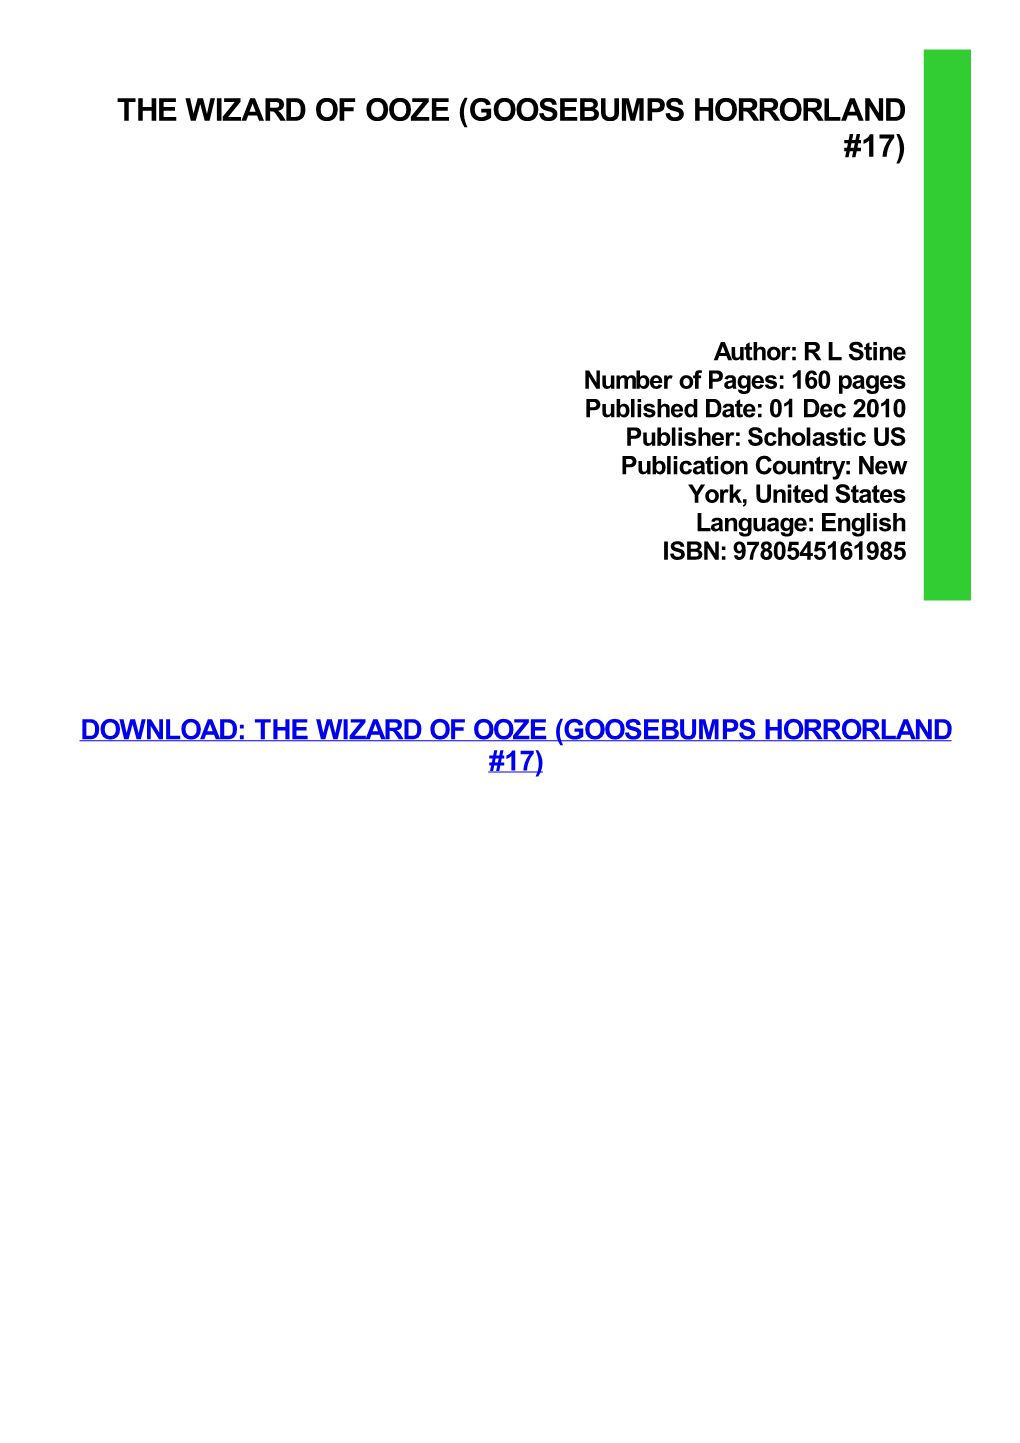 PDF Download the Wizard of Ooze (Goosebumps Horrorland #17)